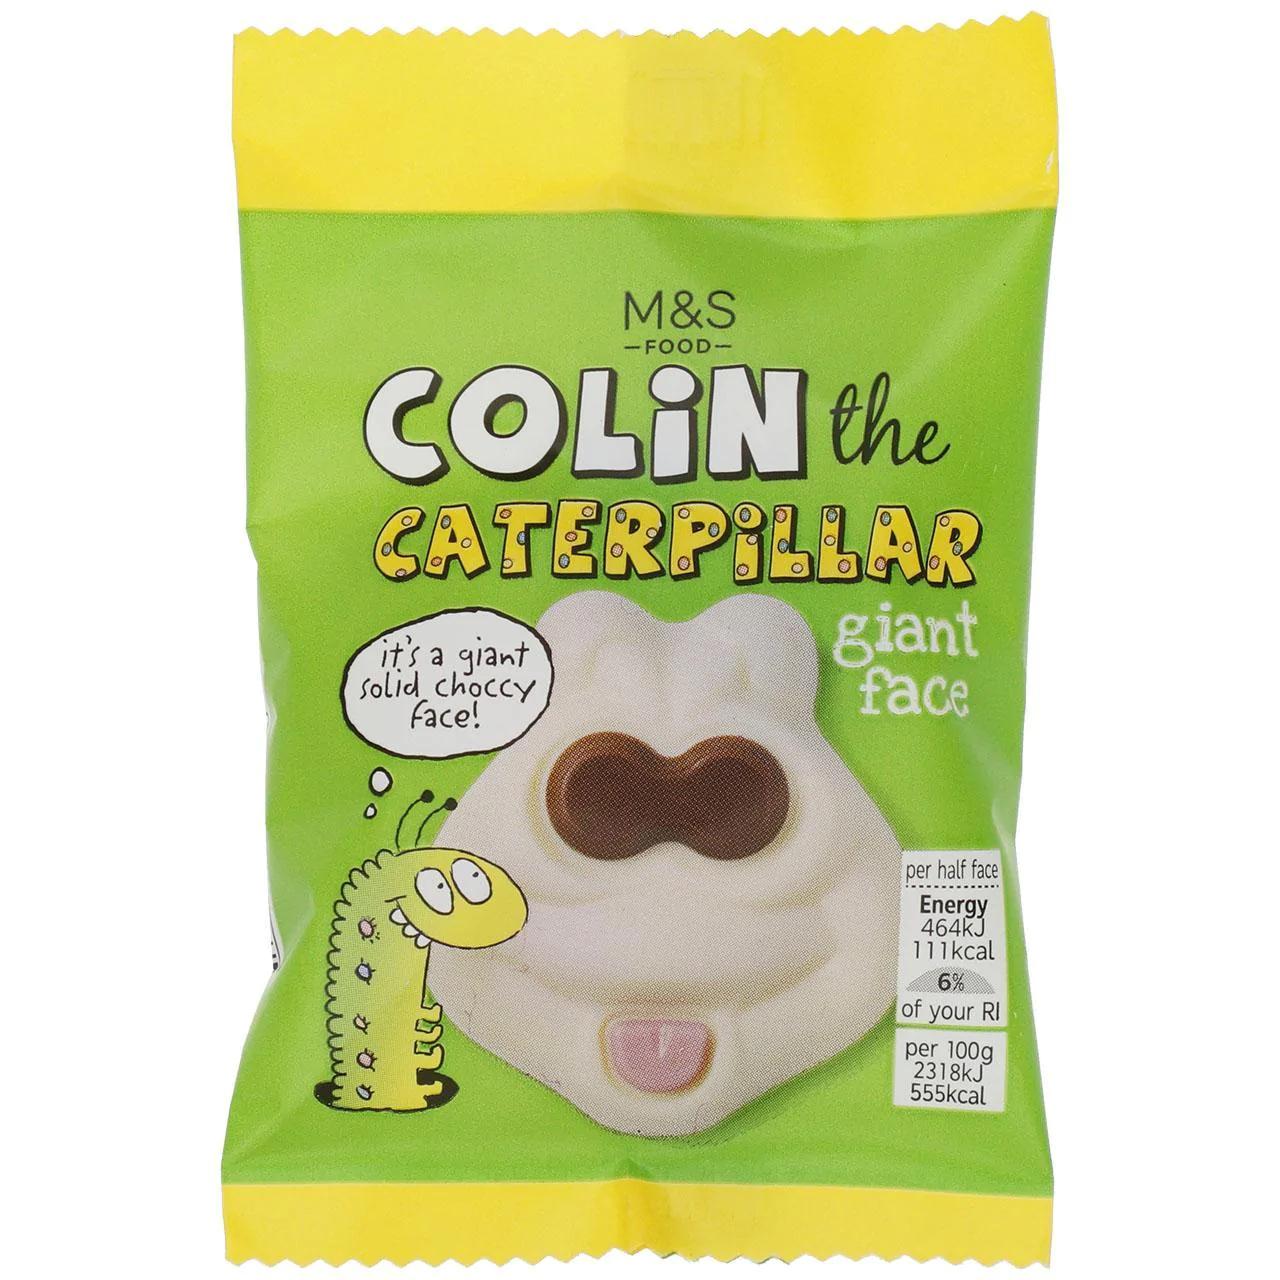 Fotografie - Colin the Caterpillar Giant Chocolate Face M&S Food